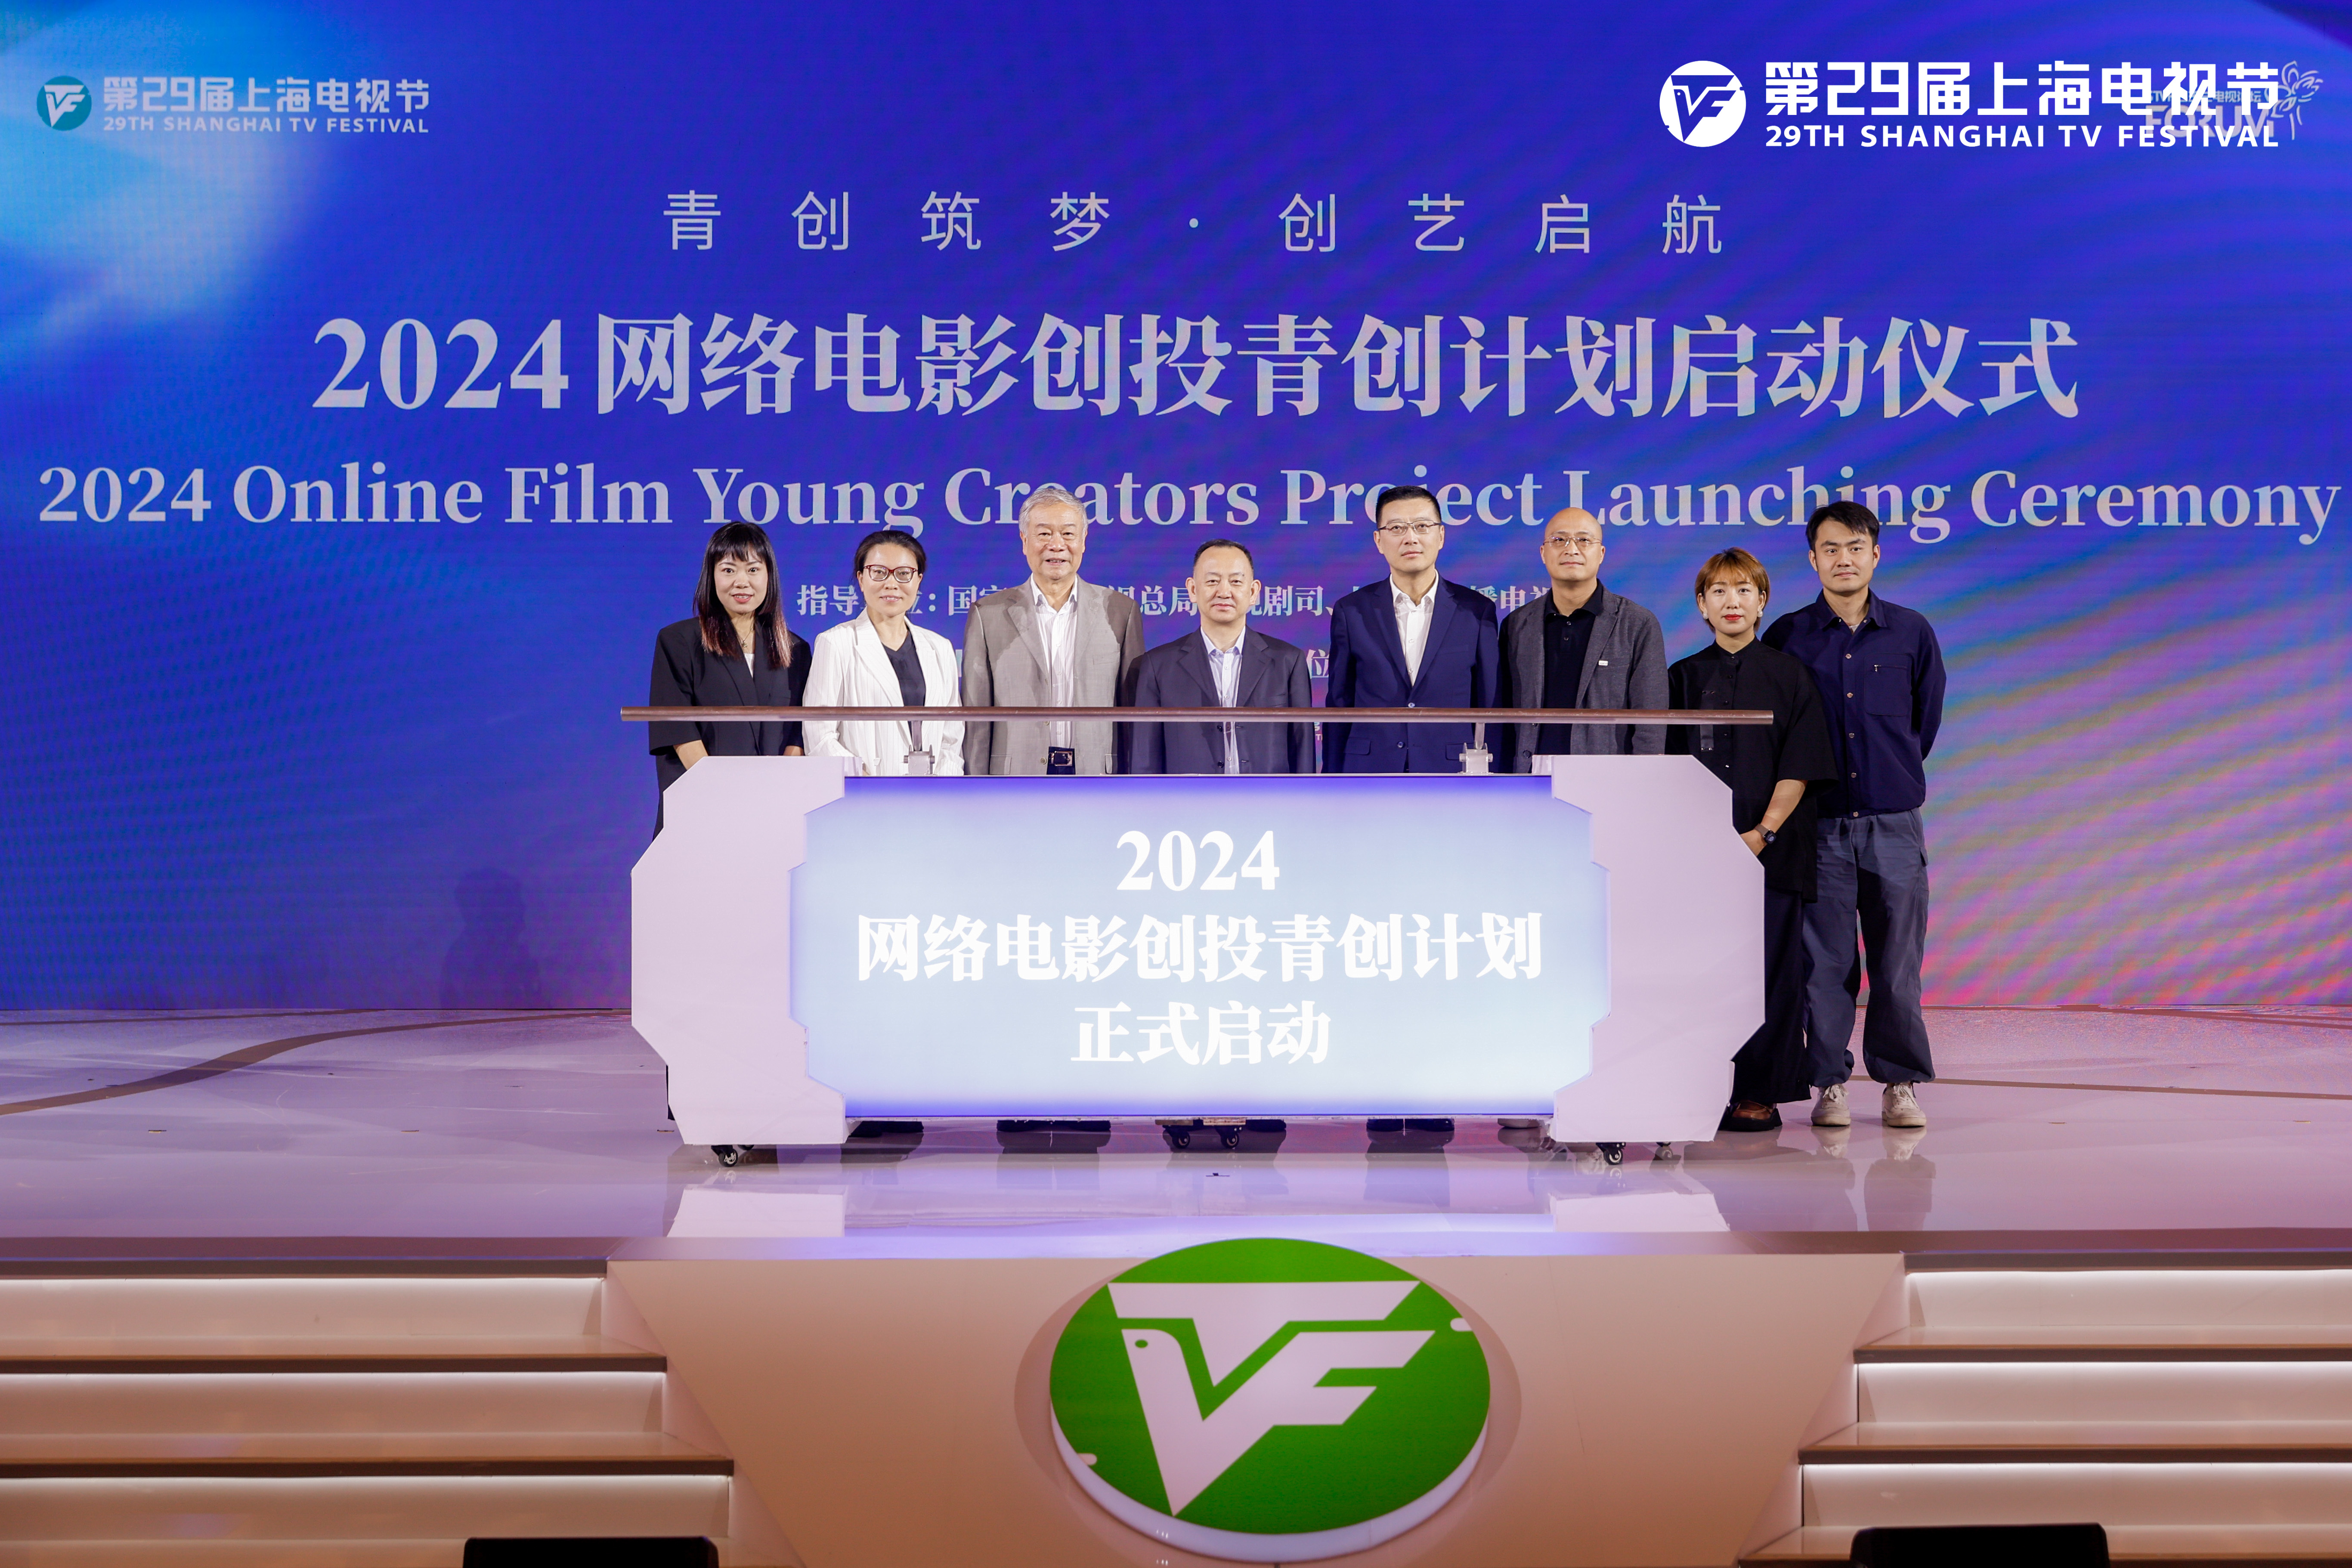 IQiyi, Two Other Chinese Video Sites Launch Young Filmmakers Project